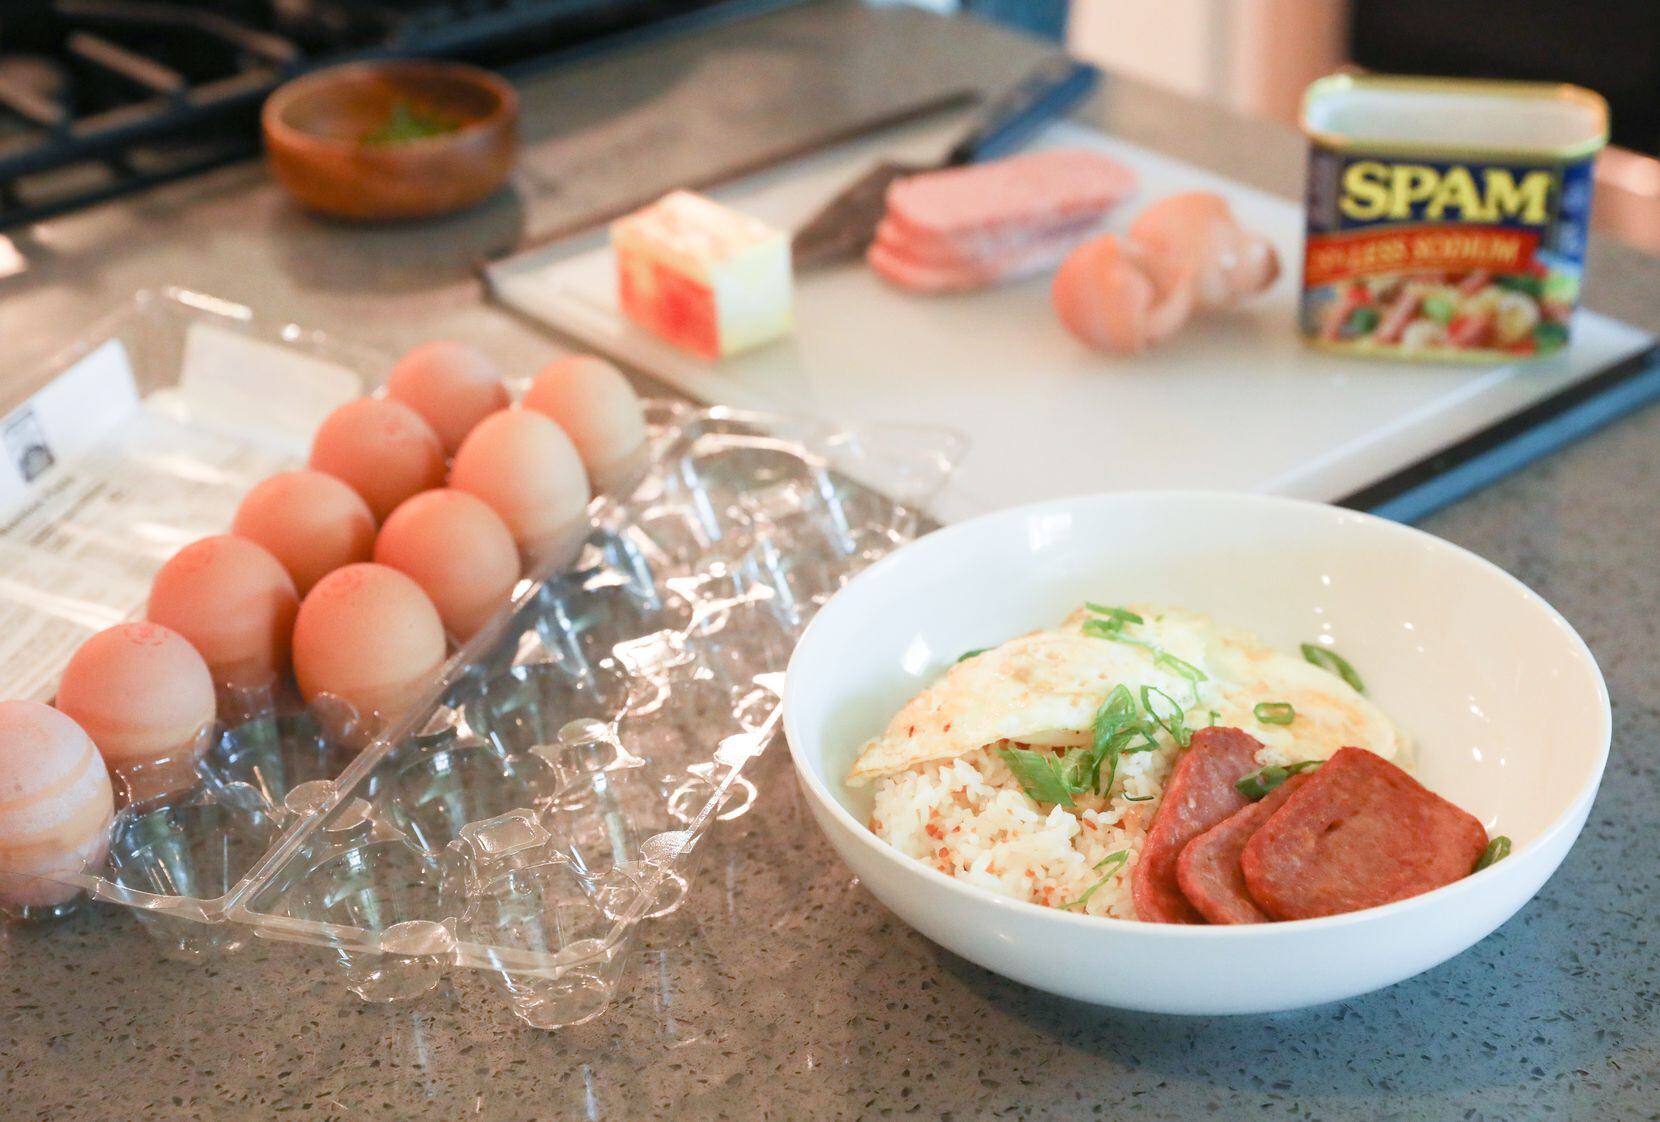 A serving of Spamsilog, a breakfast dish made with Spam, garlic fried rice and fried eggs,...